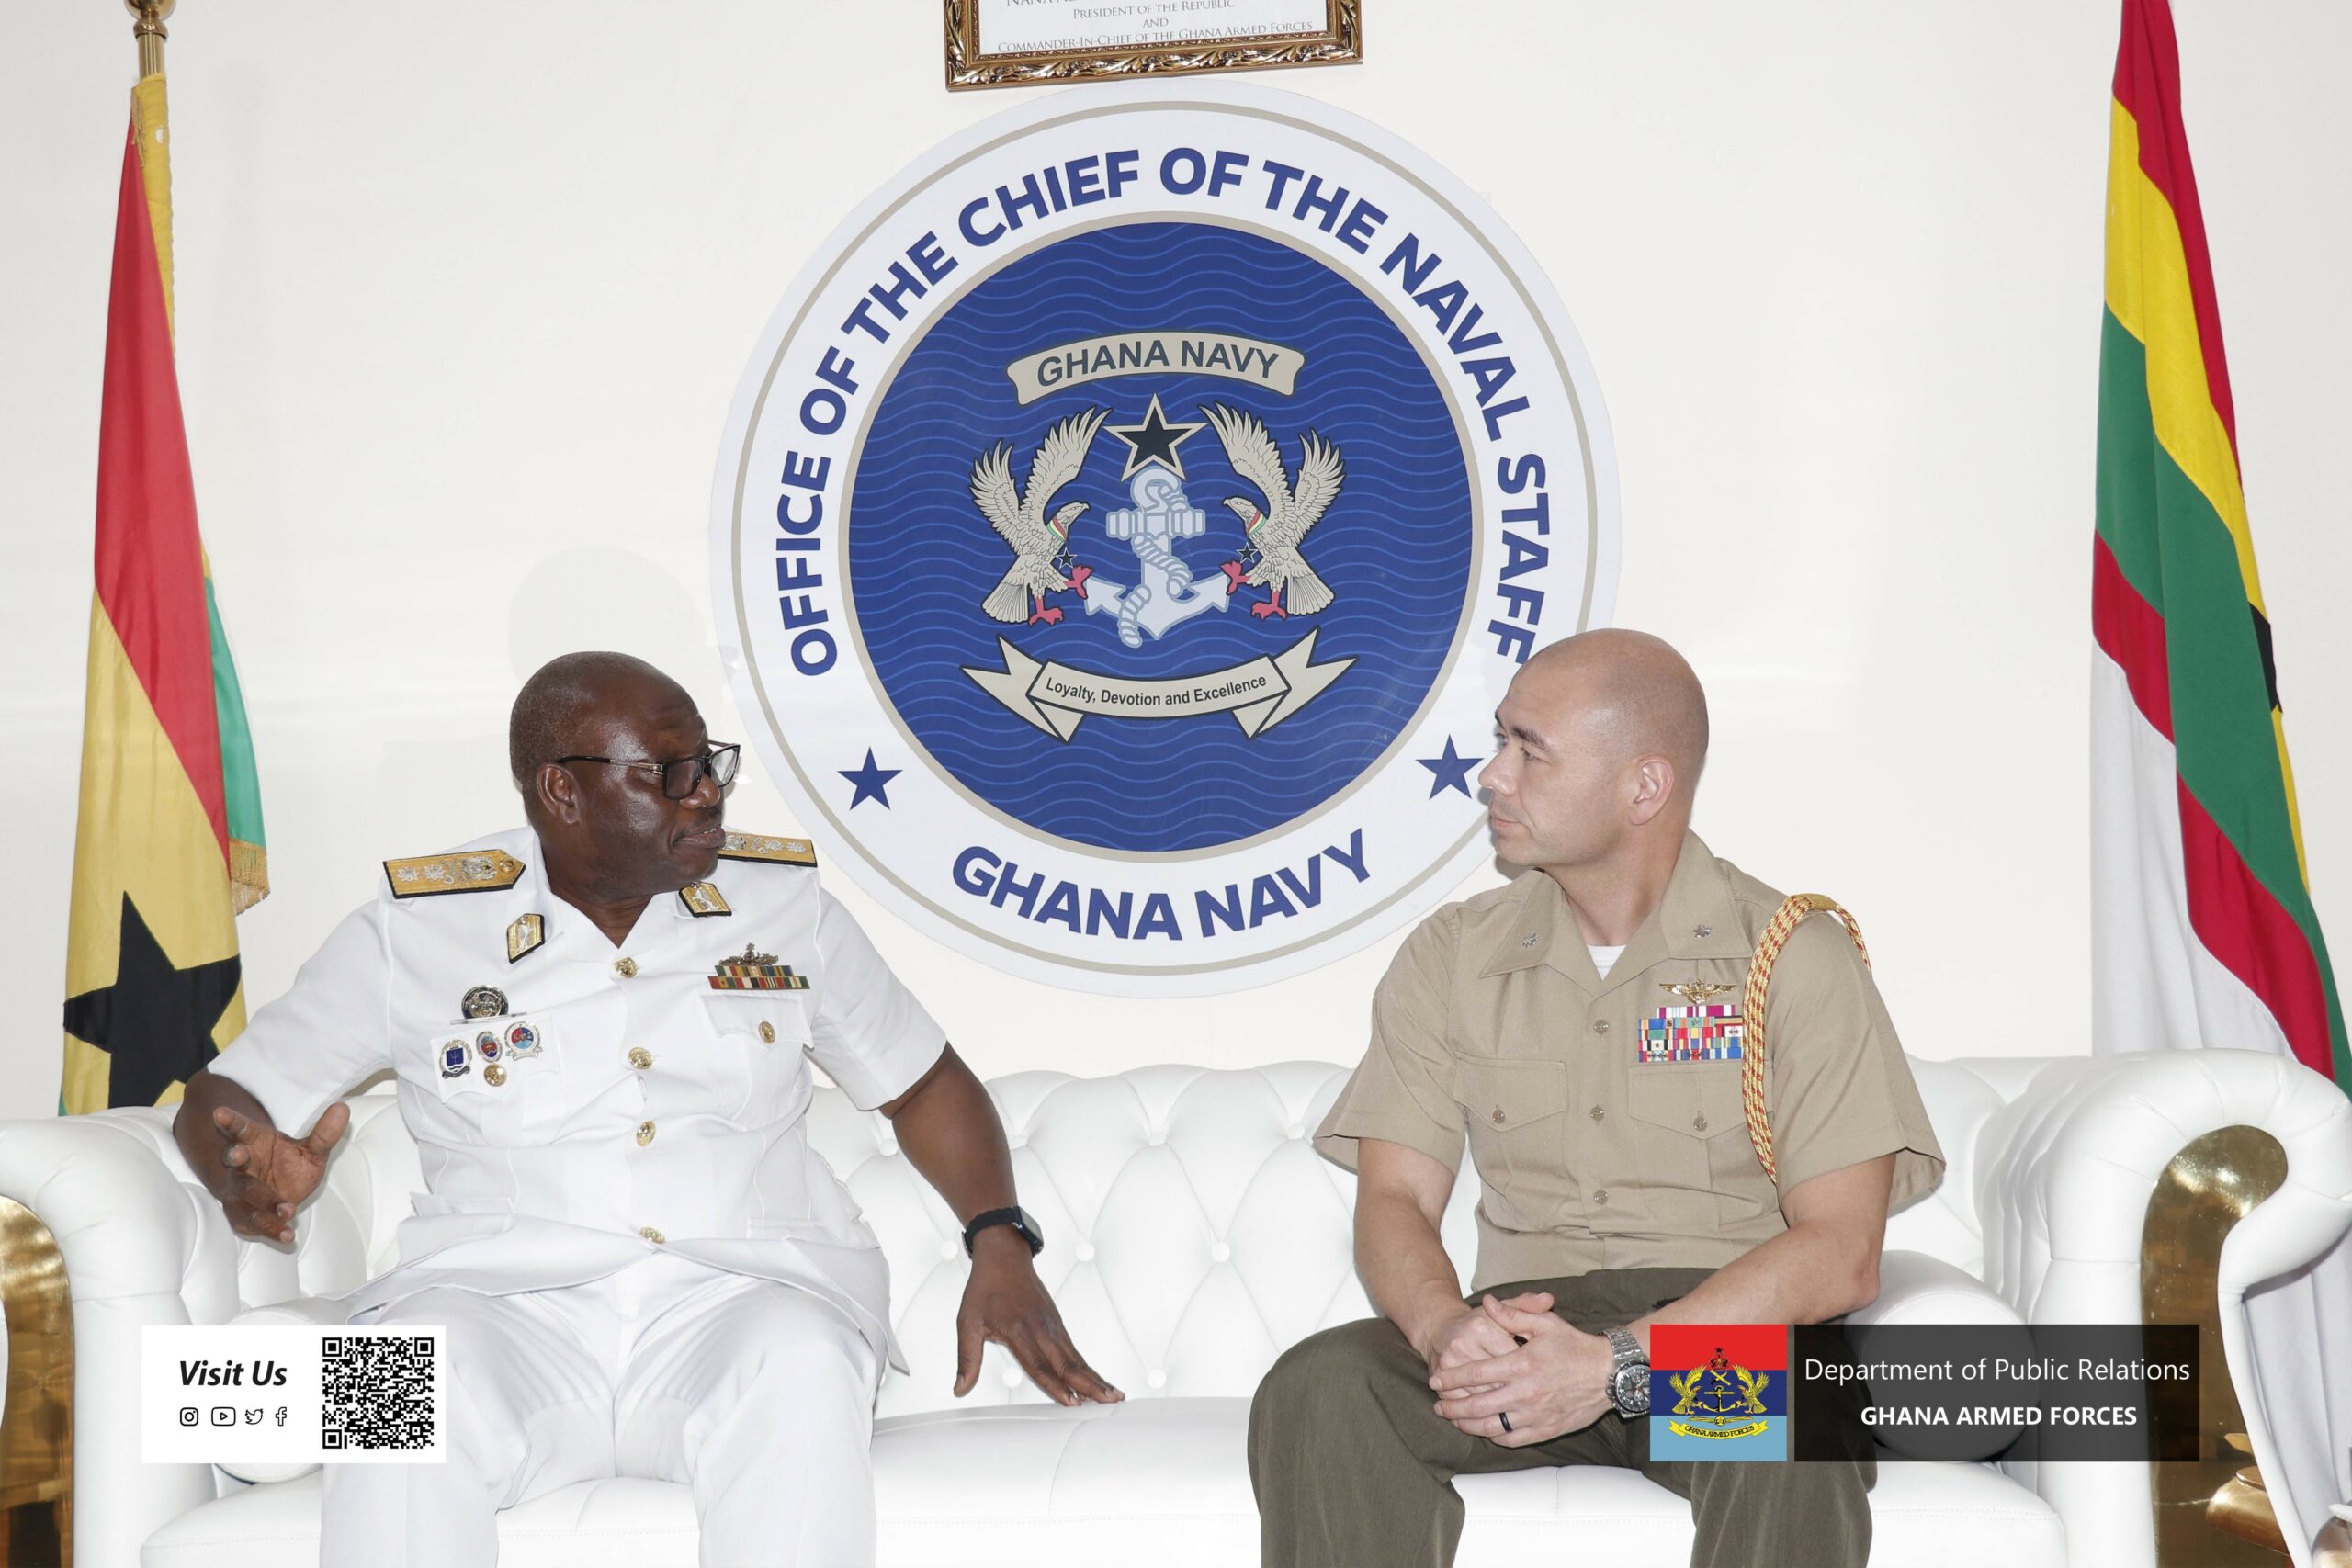 NEWLY APPOINTED US DA TO GHANA MAKES MAIDEN VISIT TO CNS